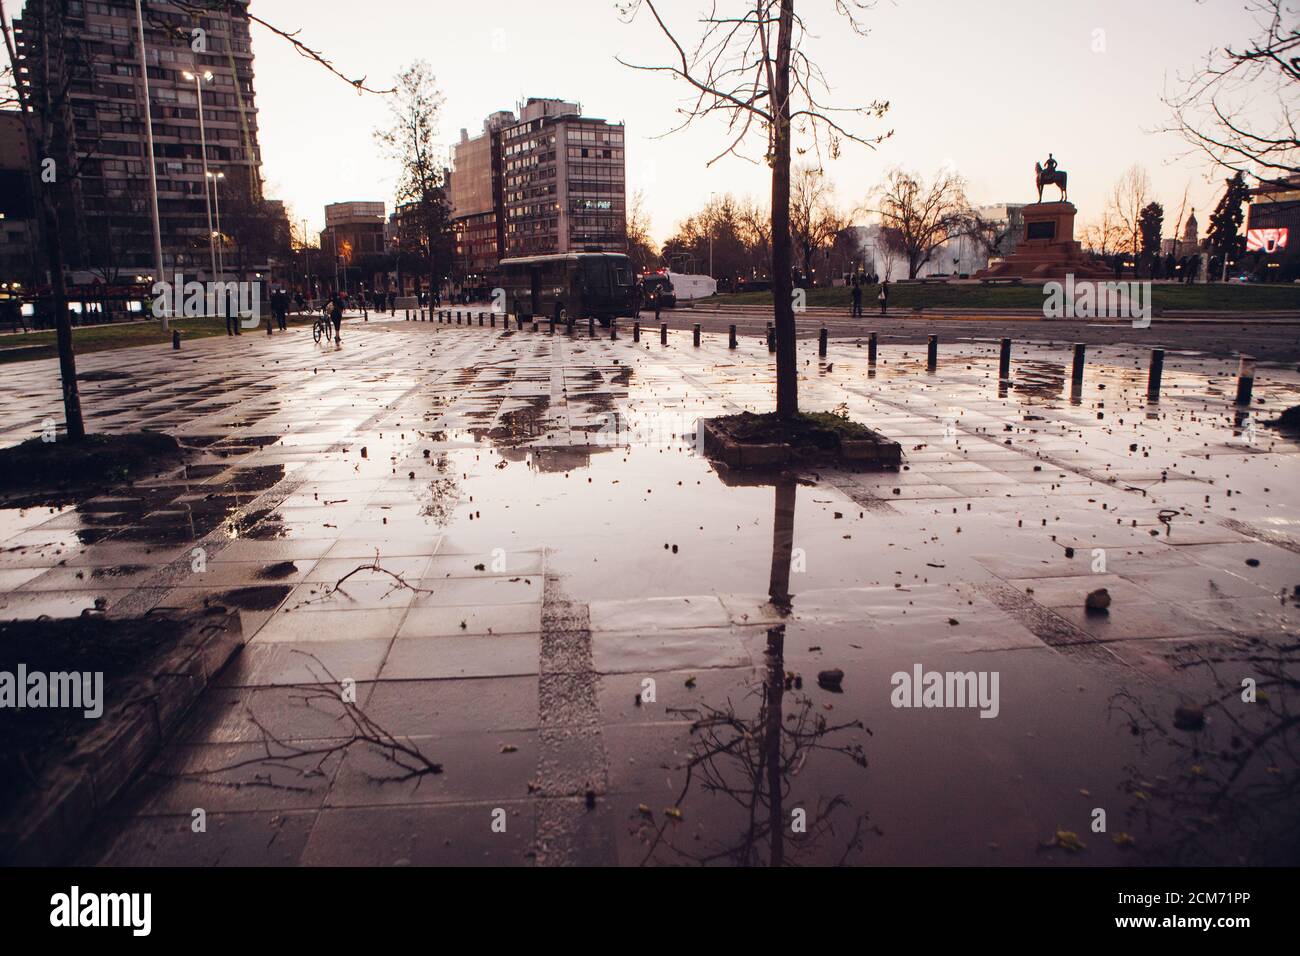 Sidewalks wet from riot police water cannons at dusk. Stock Photo